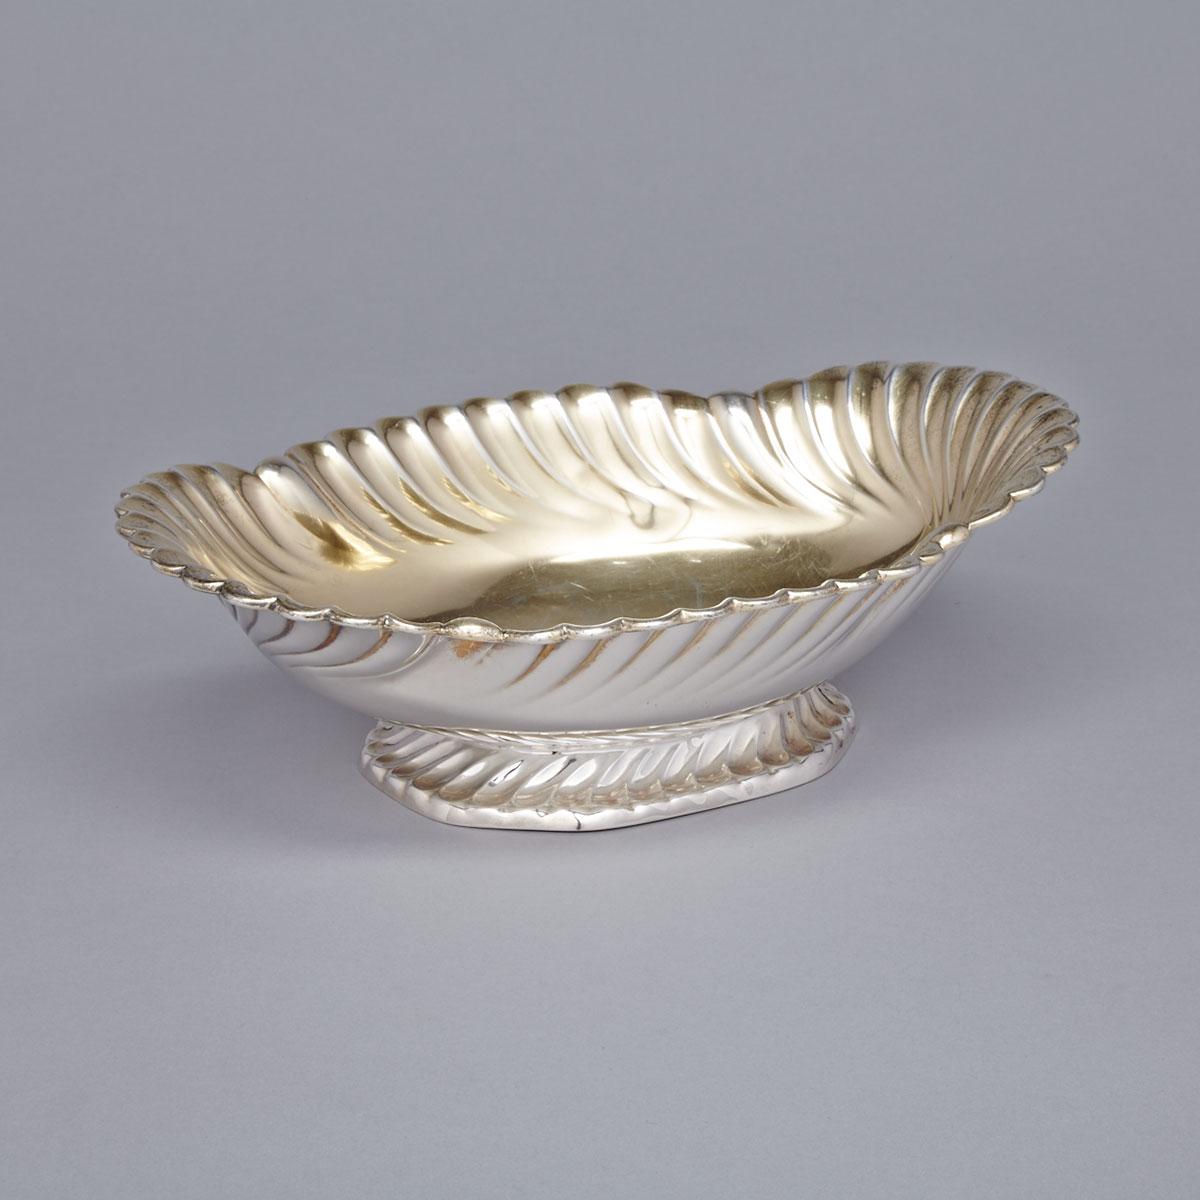 American Silver Oval Berry Bowl, Gorham Mfg. Co., Providence, R.I., 1890